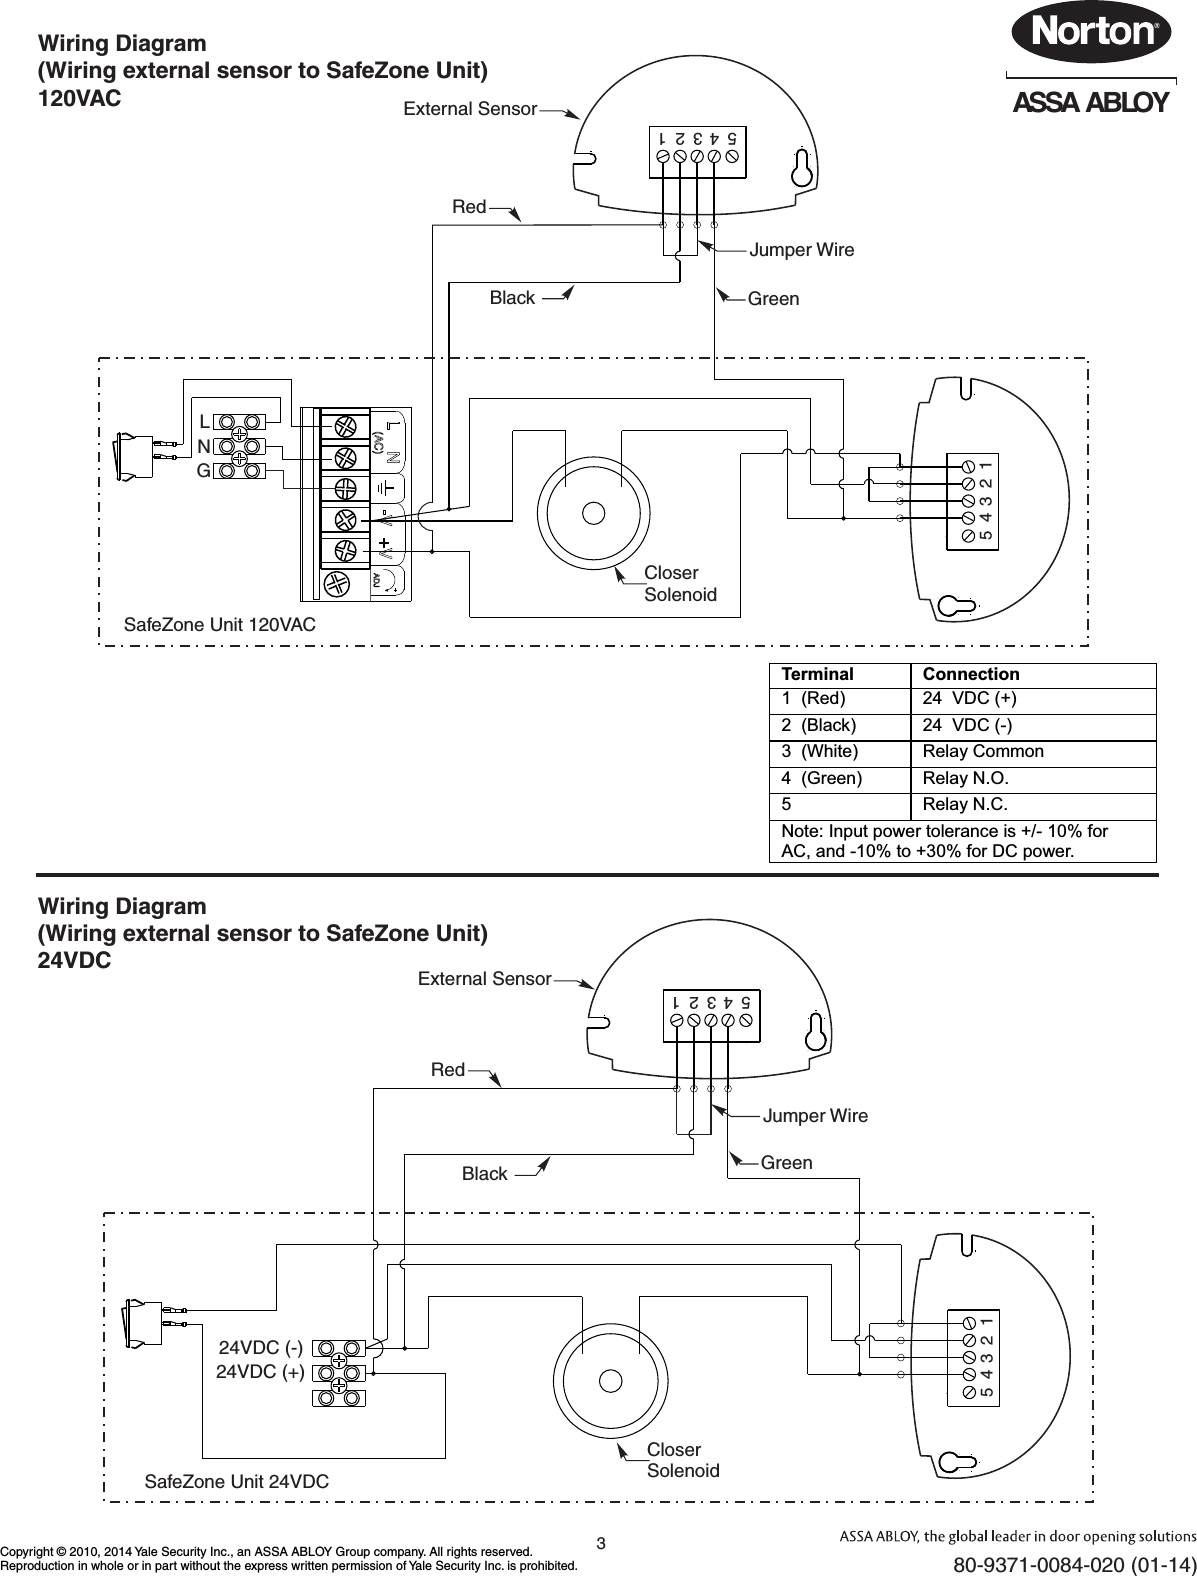 Page 3 of 6 - Norton  7100SZ Series Safe Zone With External Sensor Installation And Instruction Manual 80-9371-0084-020